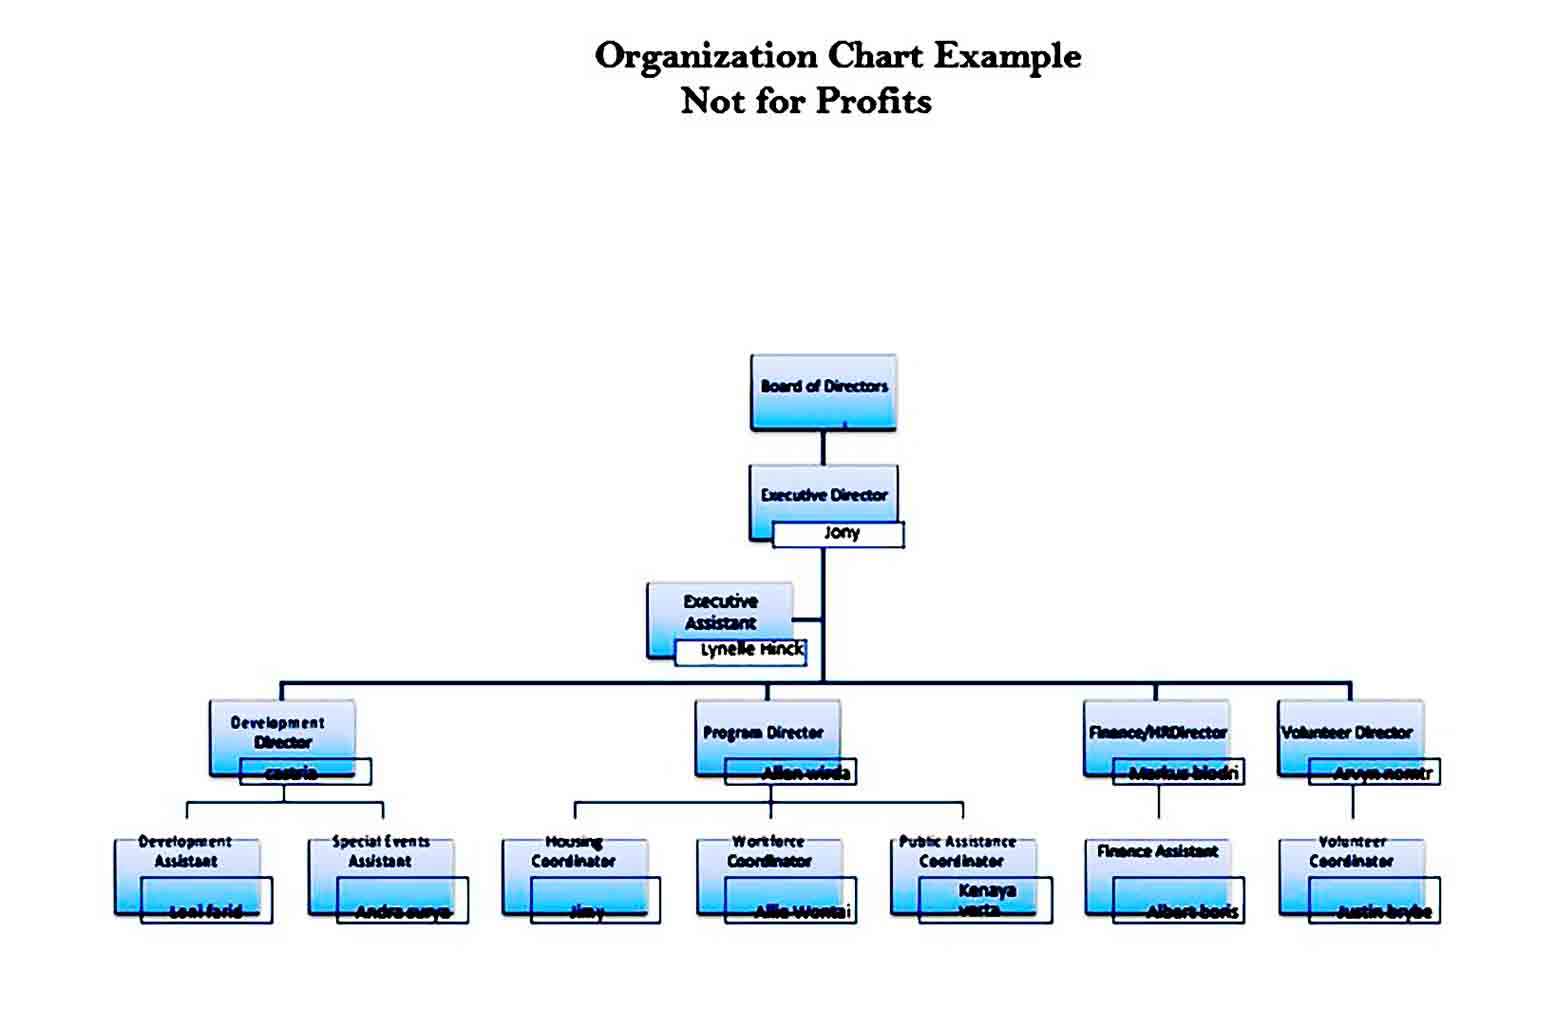 Organization Chart Example Not for Profits